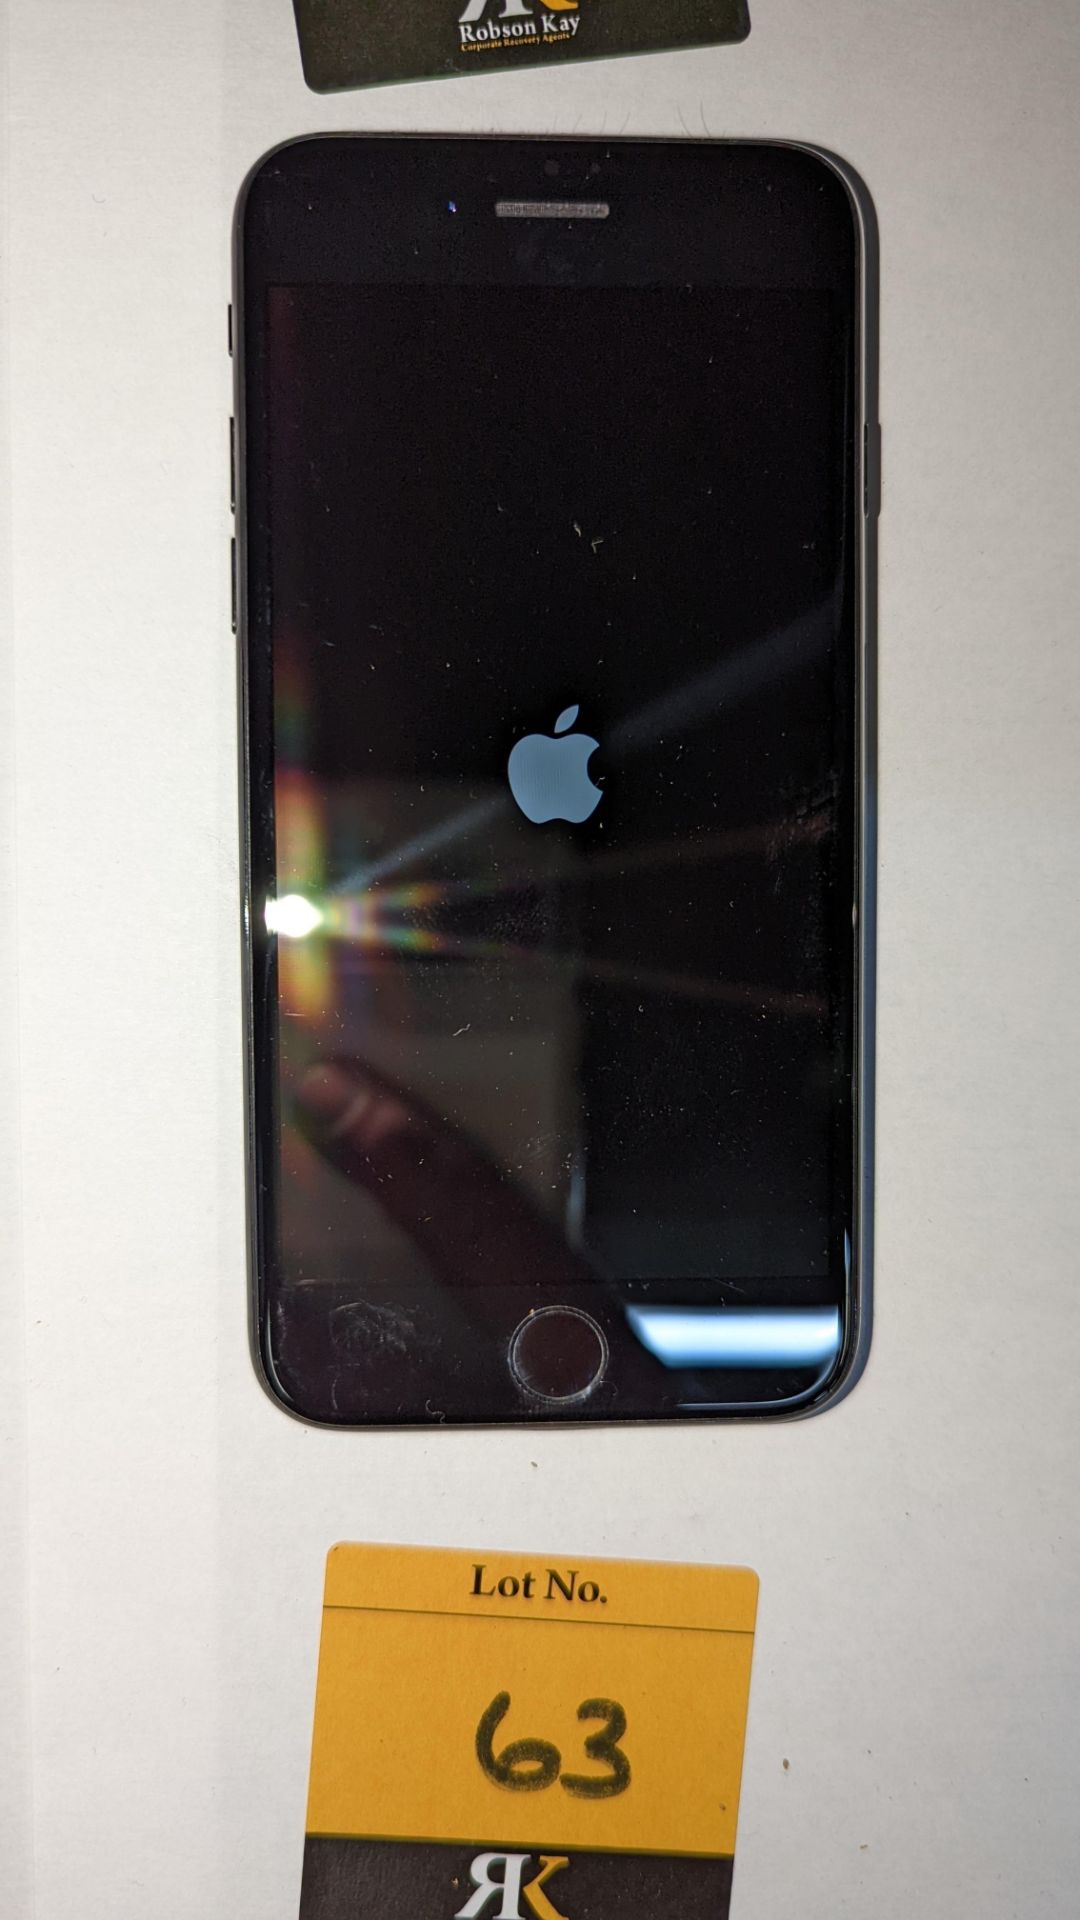 Apple iPhone 7, 32GB capacity, model A1778. No ancillaries or accessories - Image 10 of 13